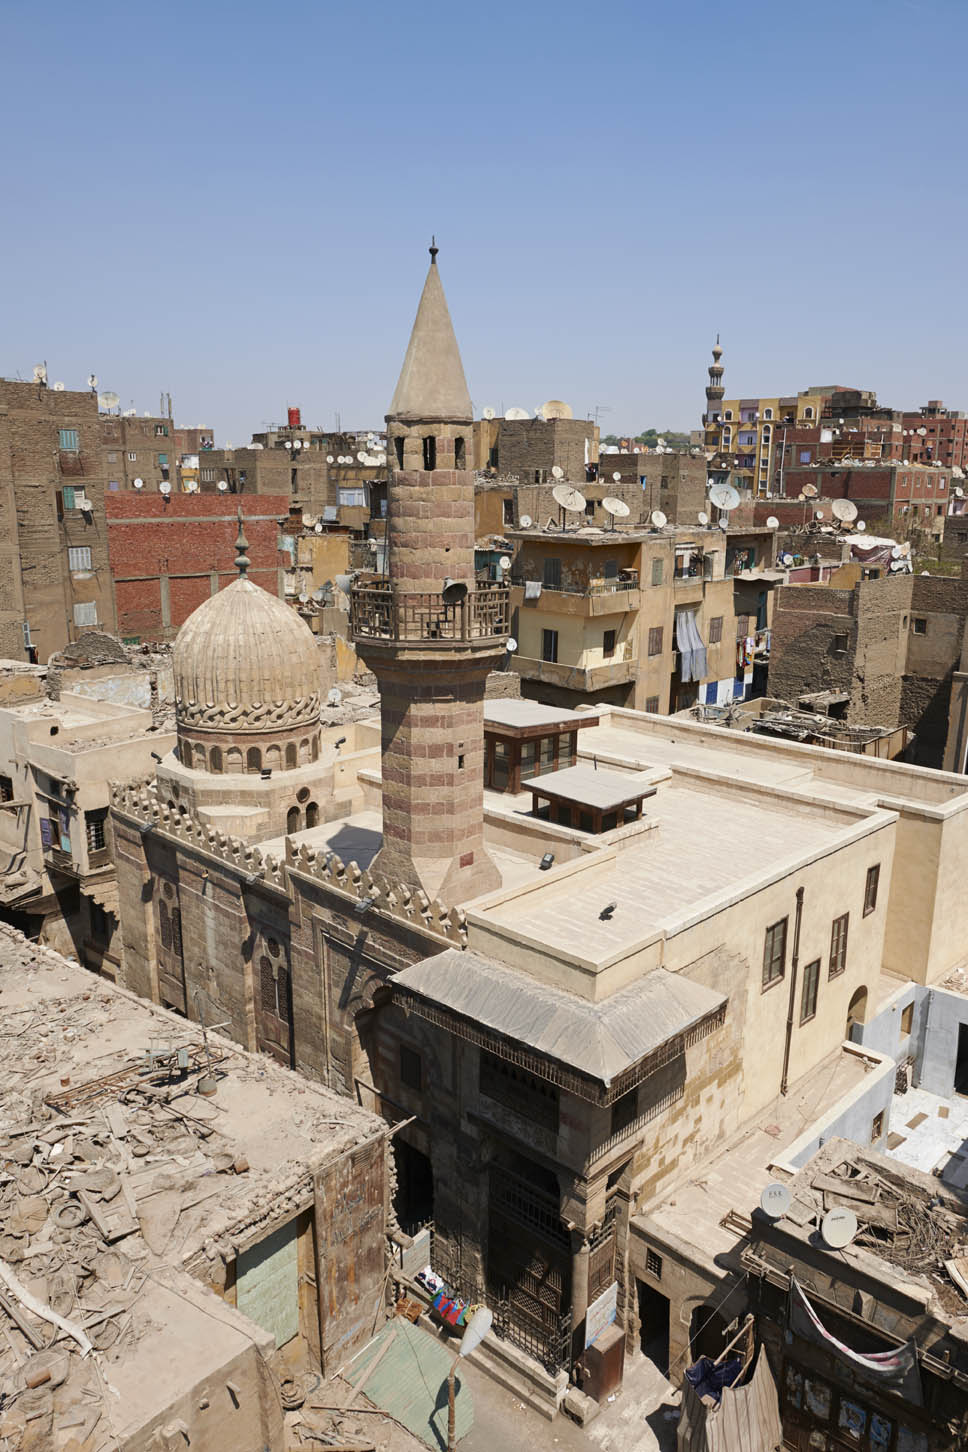 Bird's-eye view, dome and minaret visible; sabil-kuttab at lower right